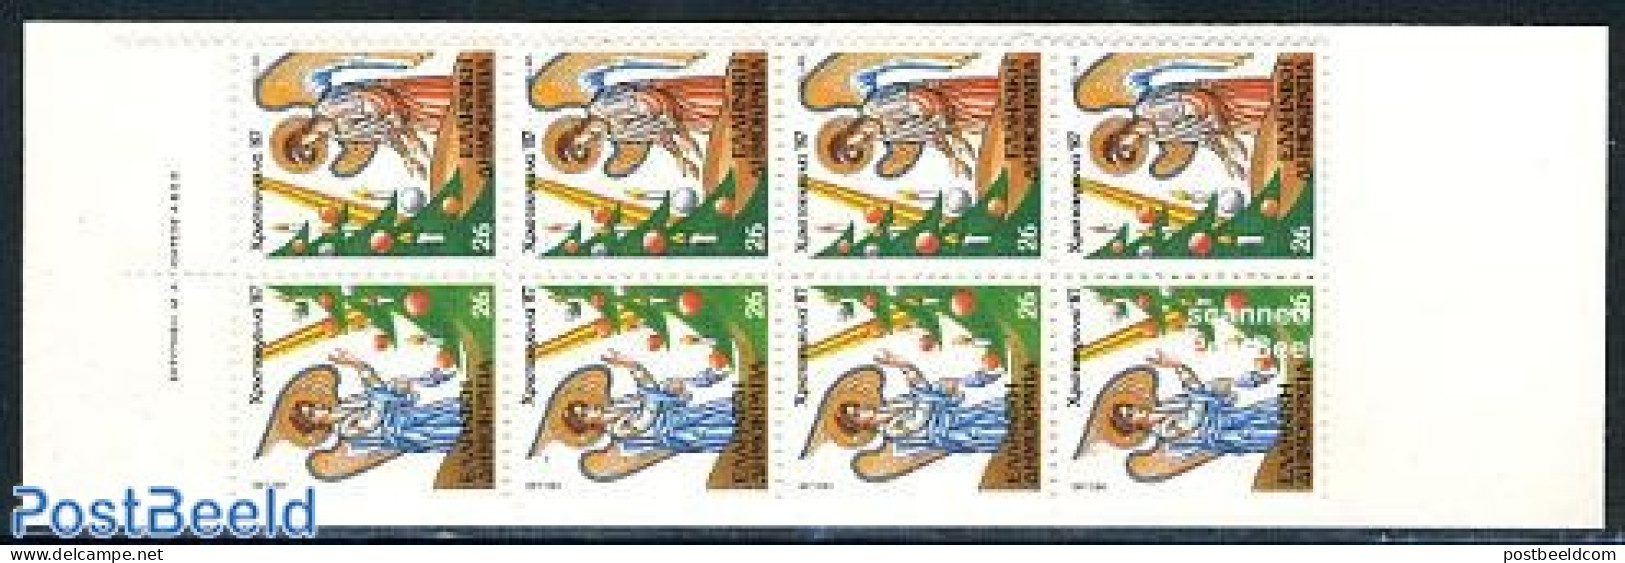 Greece 1987 Christmas Booklet, Mint NH, Religion - Christmas - Stamp Booklets - Unused Stamps